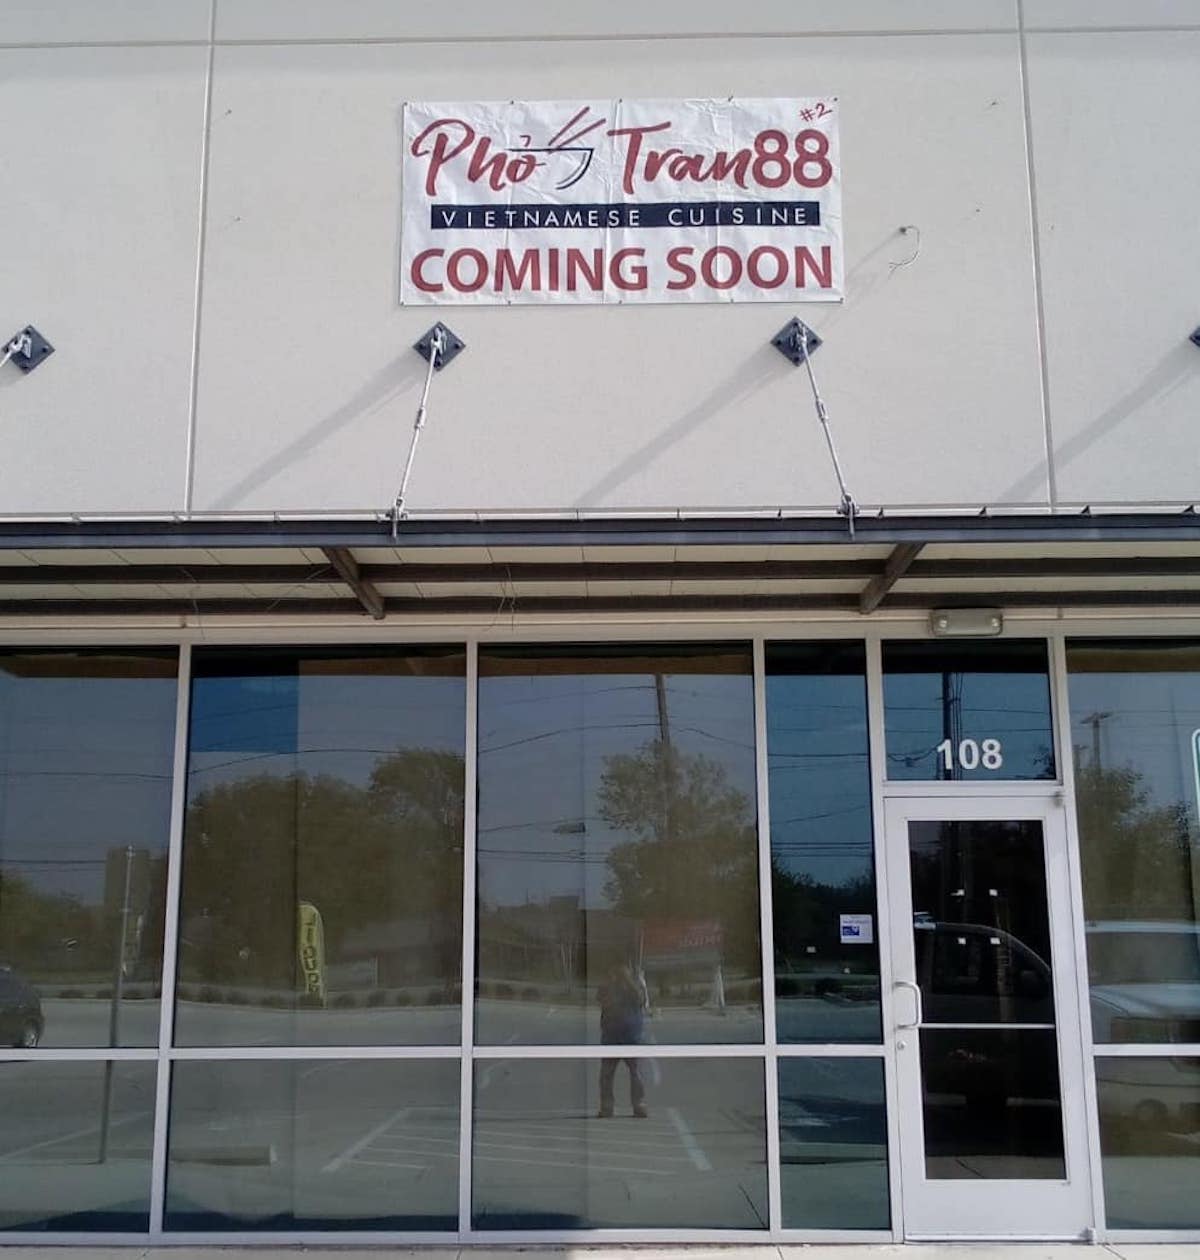 San Marcos Eatery Pho Tran88 Is Expanding to New Braunfels